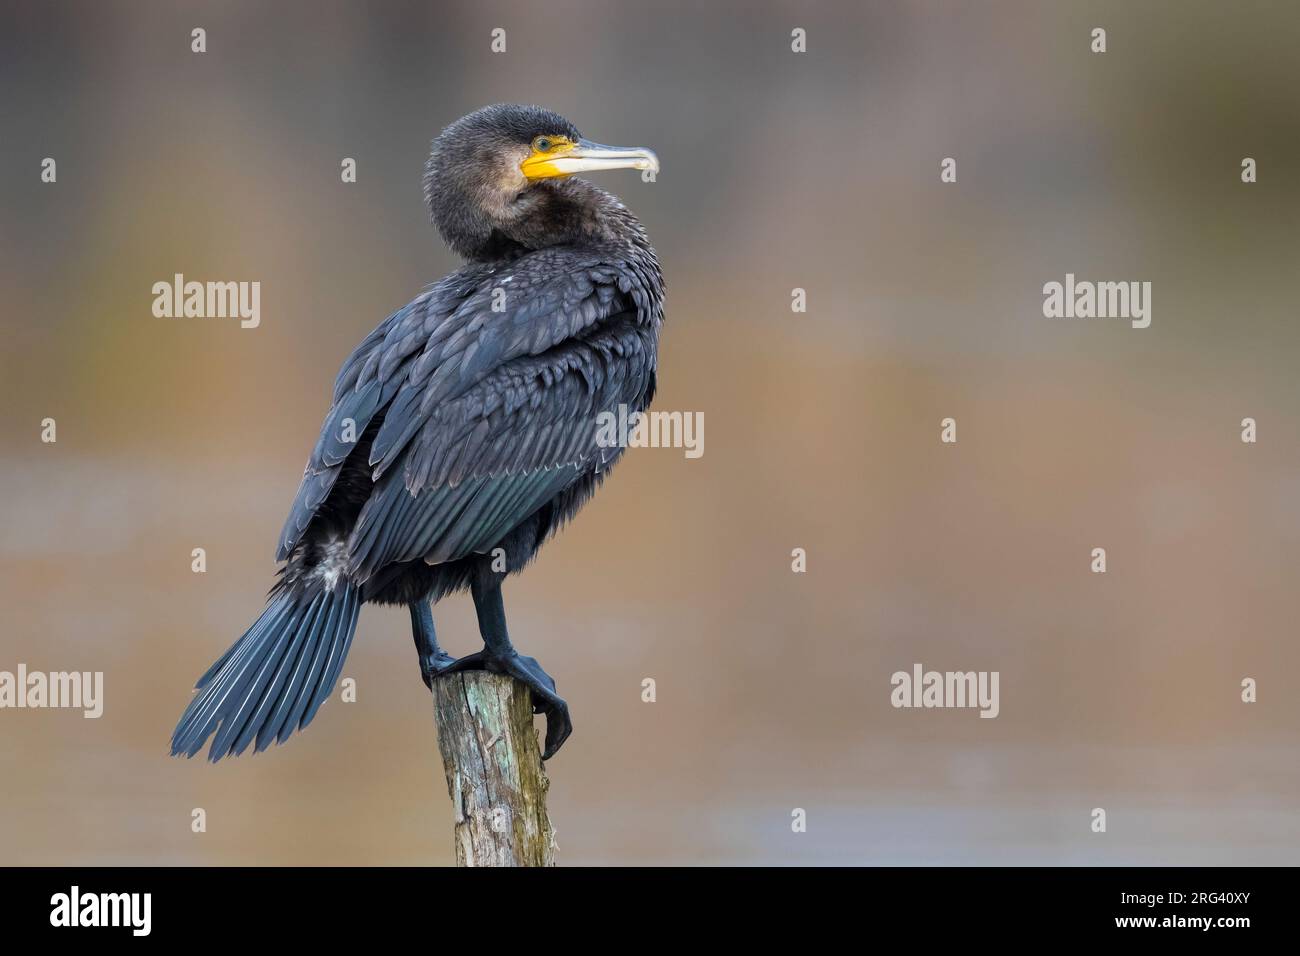 Great Cormorant (Phalacrocorax carbo ssp. sinensis) perched on a pole Stock Photo